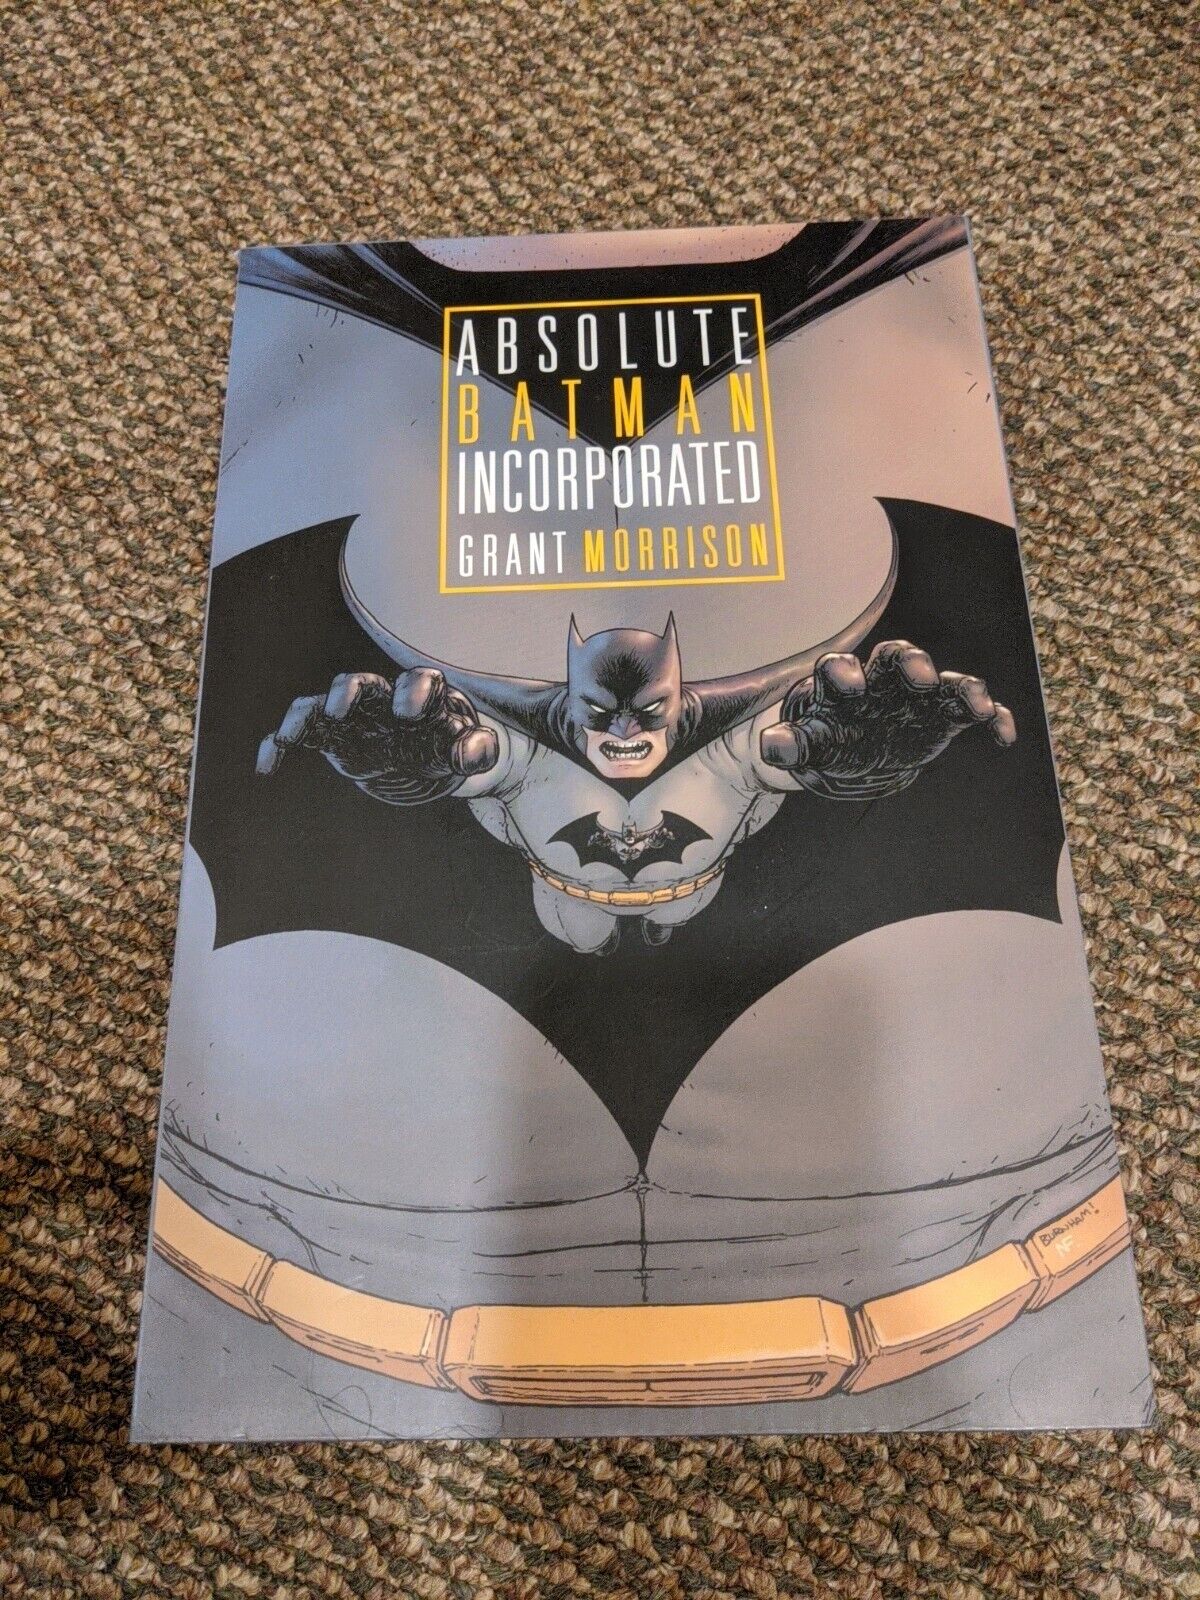 Absolute Batman Incorporated (DC Comics, March 2015)